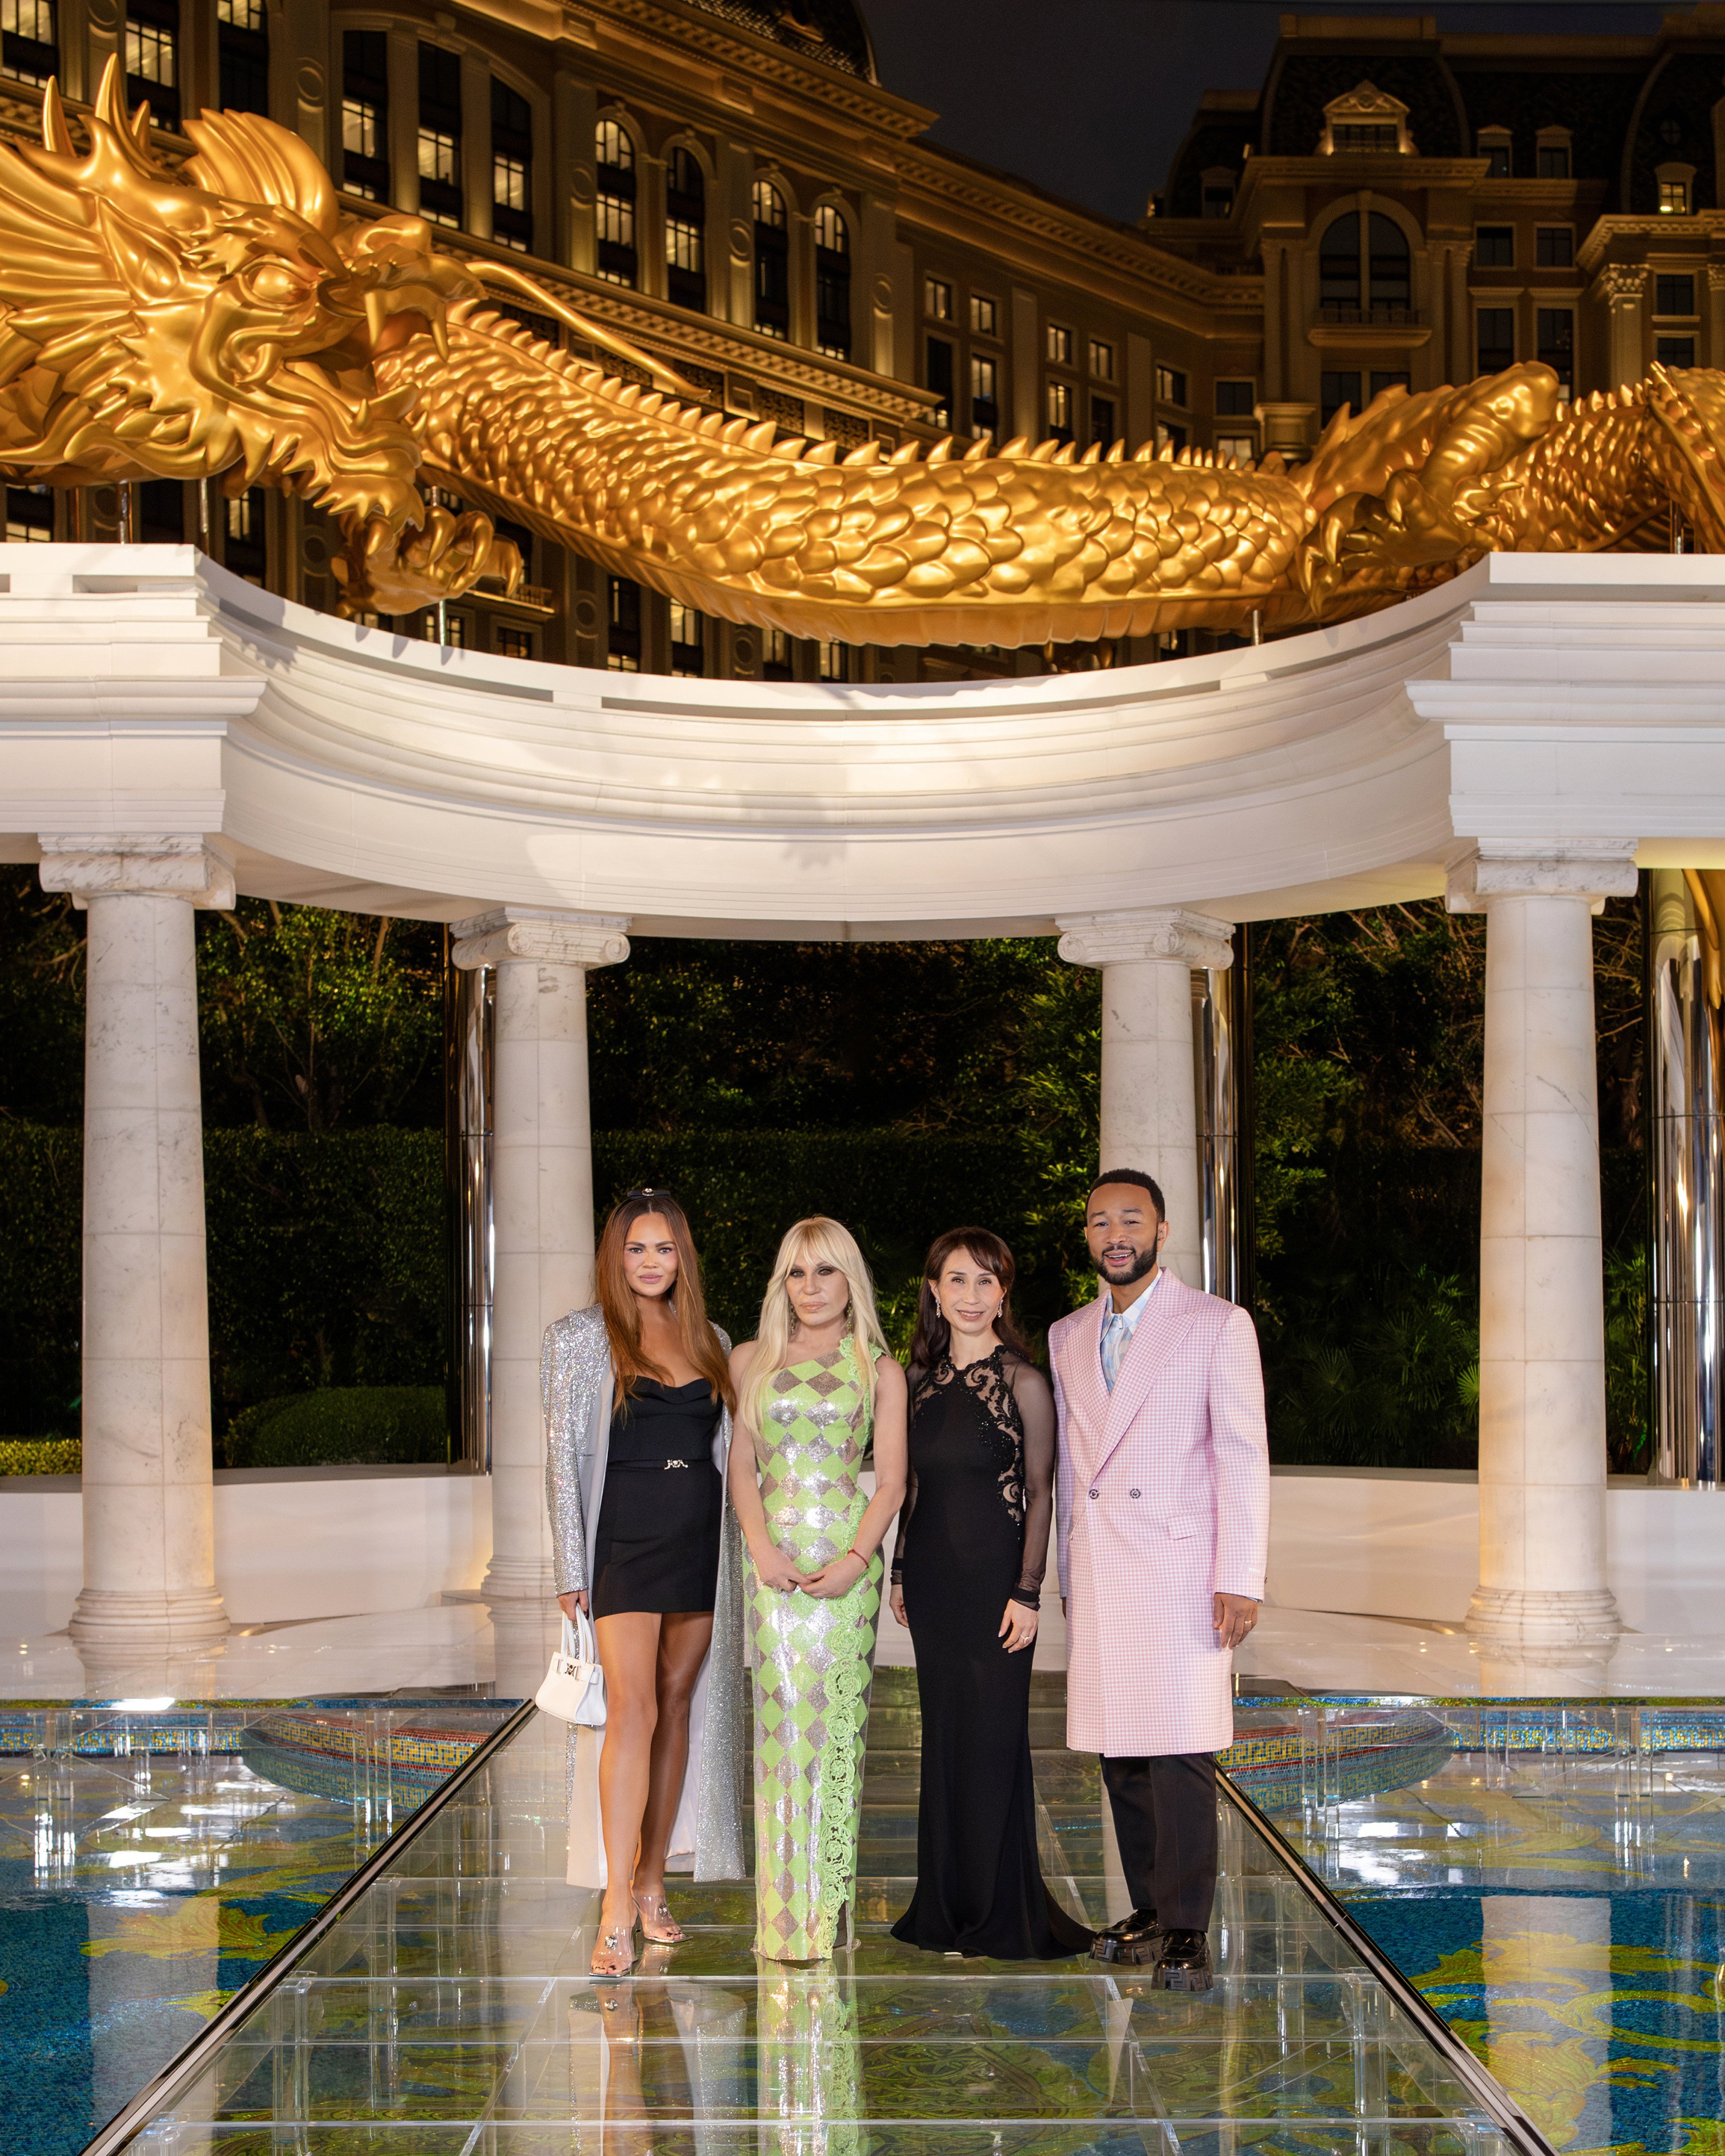 Singer John Legend and his wife Chrissy Teigen joined Donatella Versace and Daisy Ho in marking the opening of the Palazzo Versace Macau. Photos: Handout